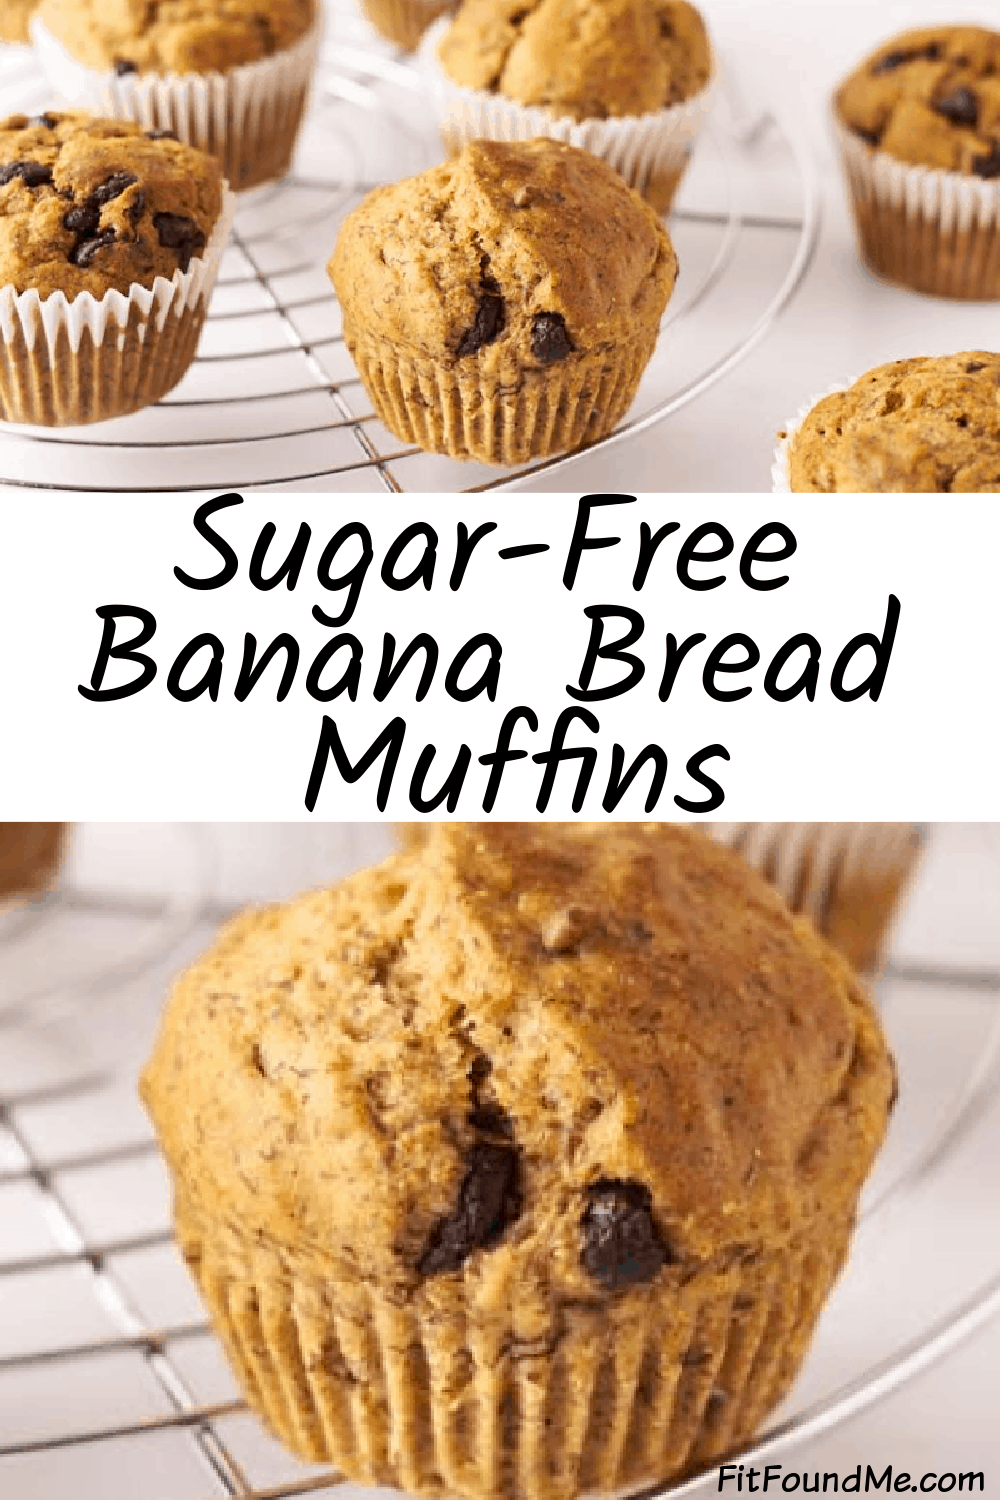 Healthy. Delicious. Macro friendly. Dairy-Free. That's what makes these the best muffins for your family. Banana bread muffins that are so moist, full of flavor you'll forget they are healthy. This is one of those recipes you can throw together quickly and have ready to serve your family in 30 min or less.  via @fitfoundme